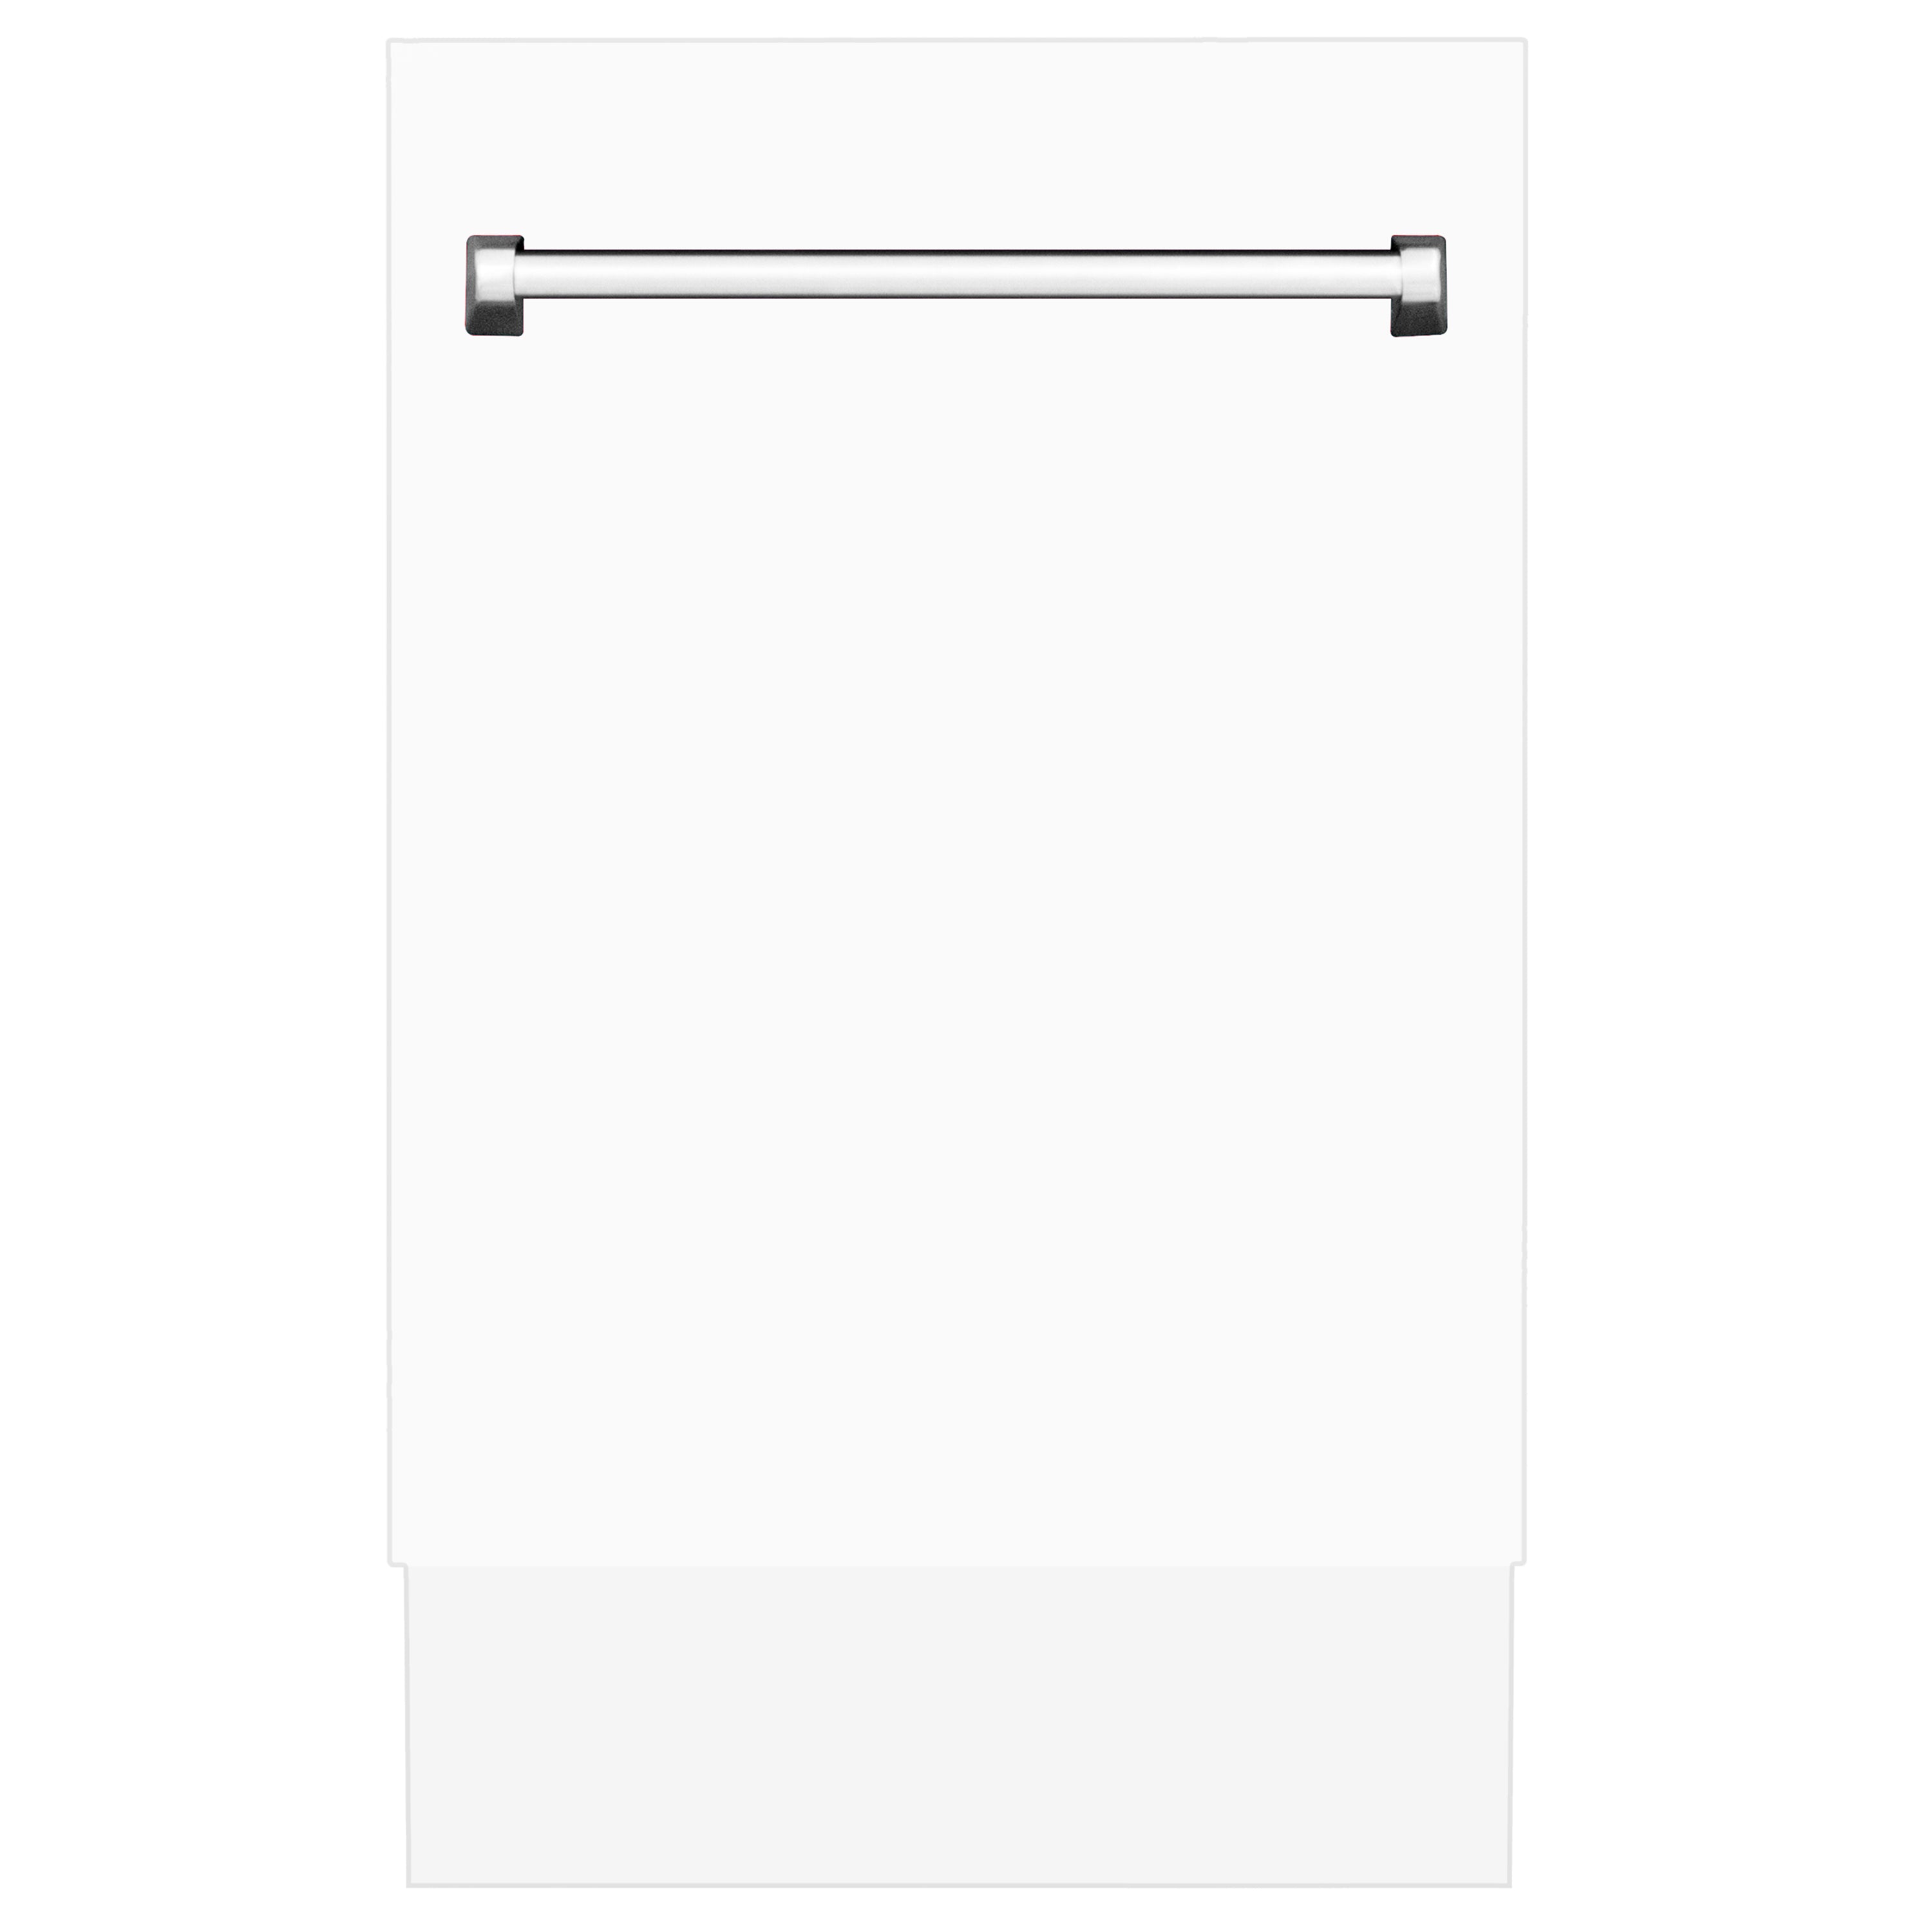 ZLINE 18 in. Tallac Series 3rd Rack Top Control Built-In Dishwasher in White Matte with Stainless Steel Tub, 51dBa (DWV-WM-18) front, closed.